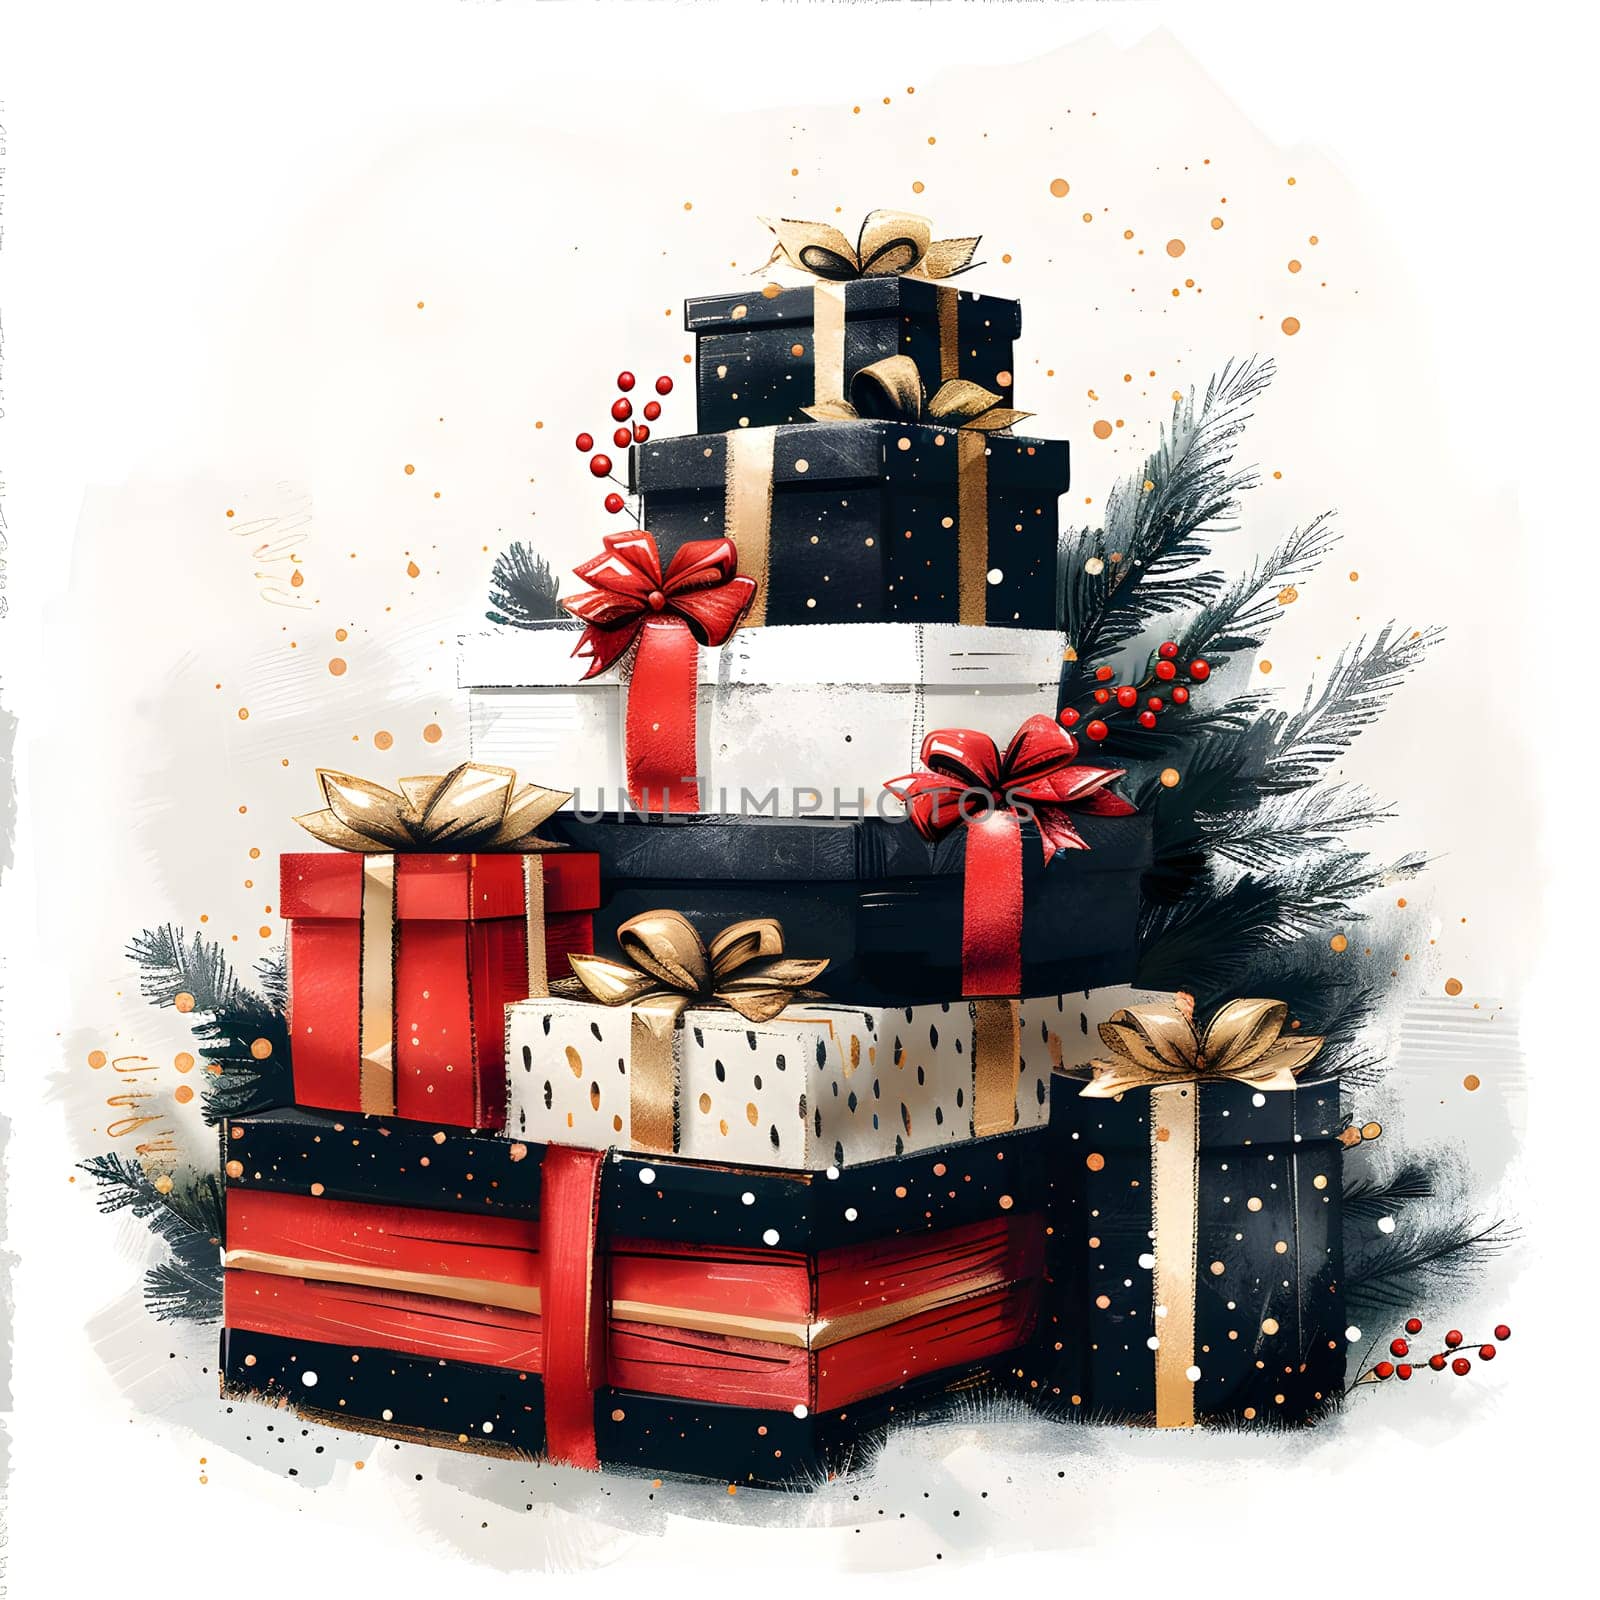 A stack of Christmas presents next to a decorated tree by Nadtochiy